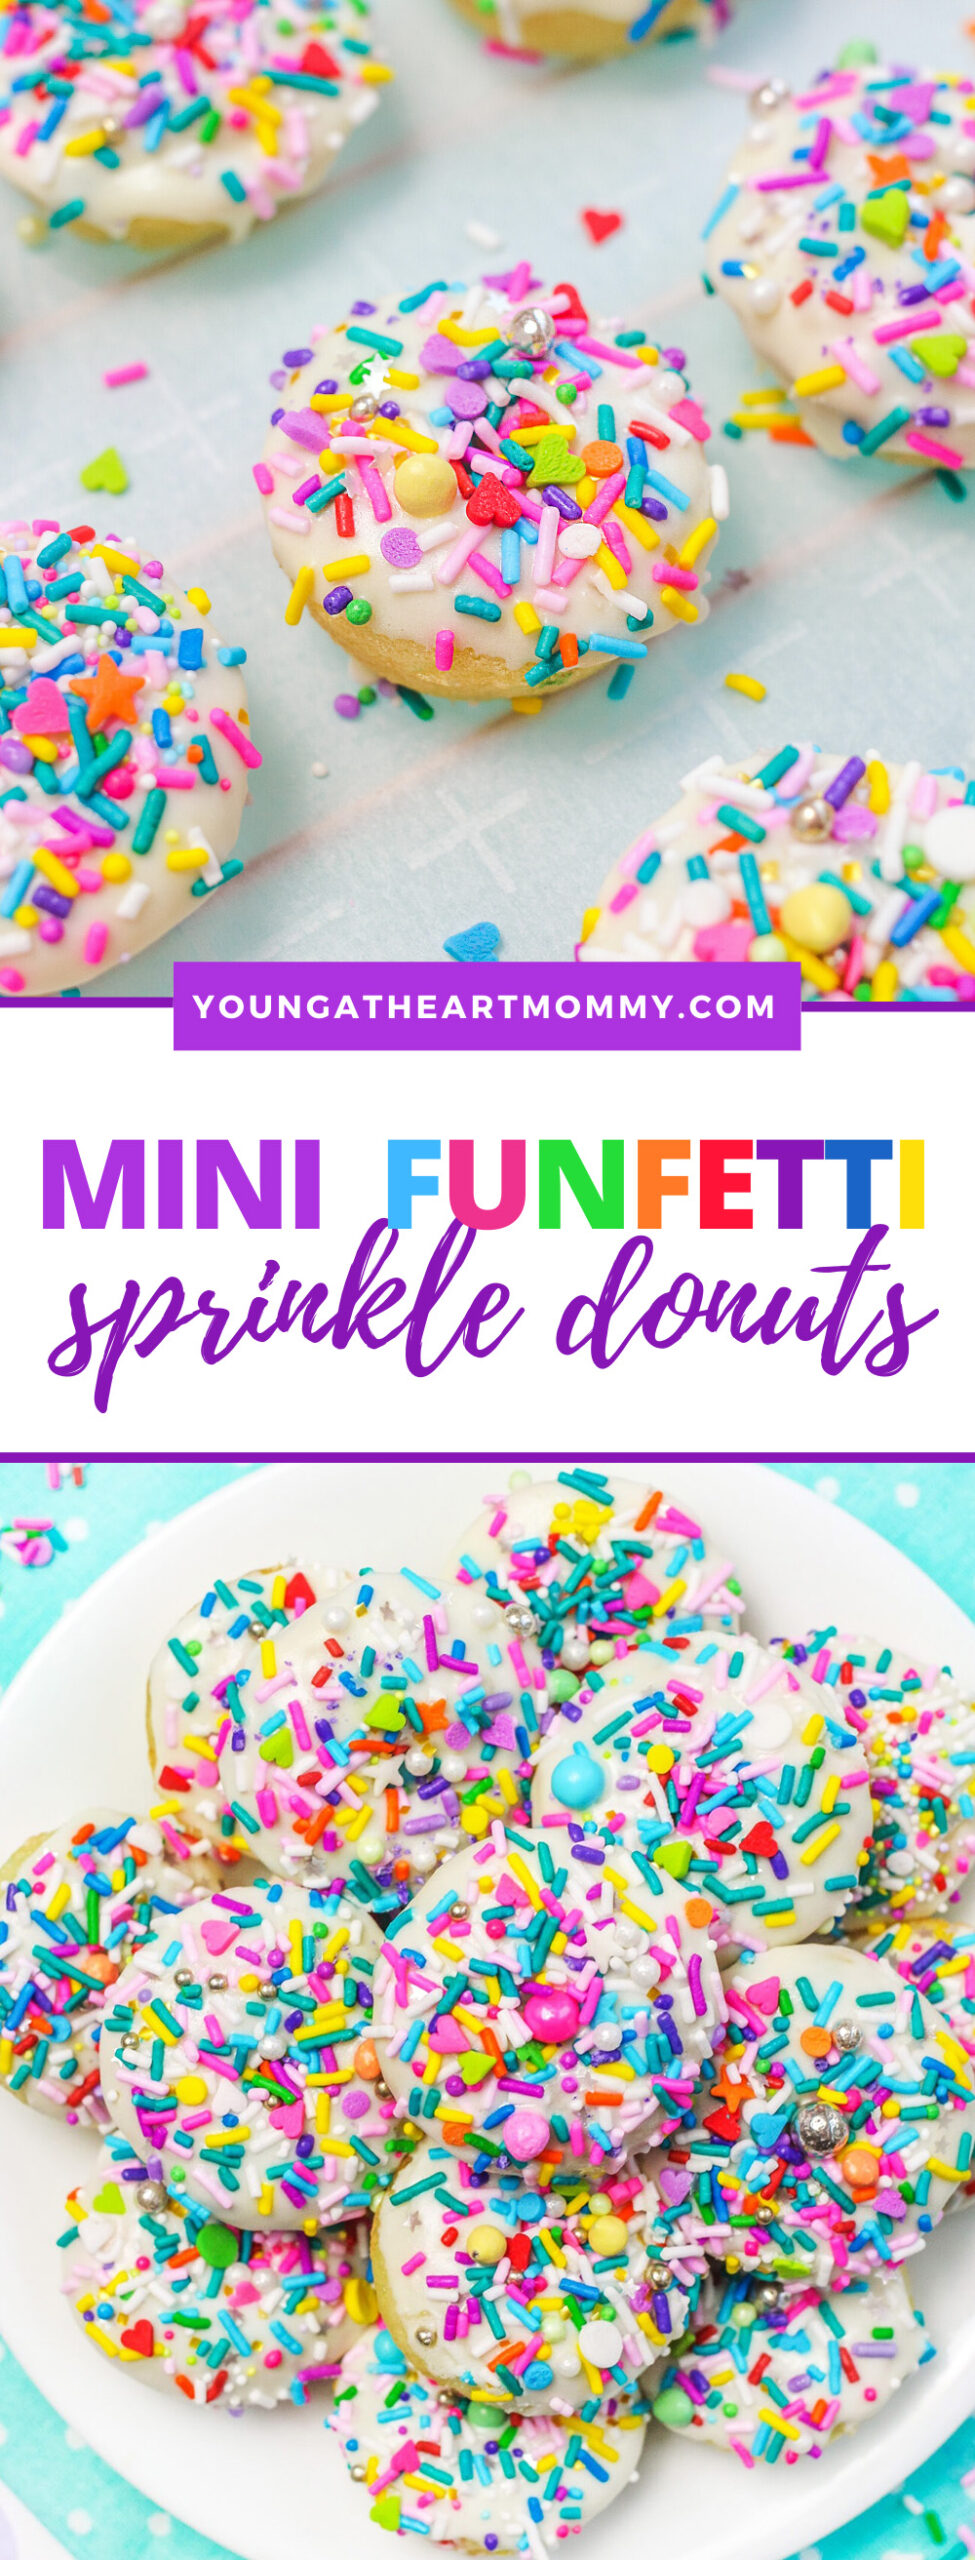 Mini Funetti Cake Mix Donuts With Sprinkles